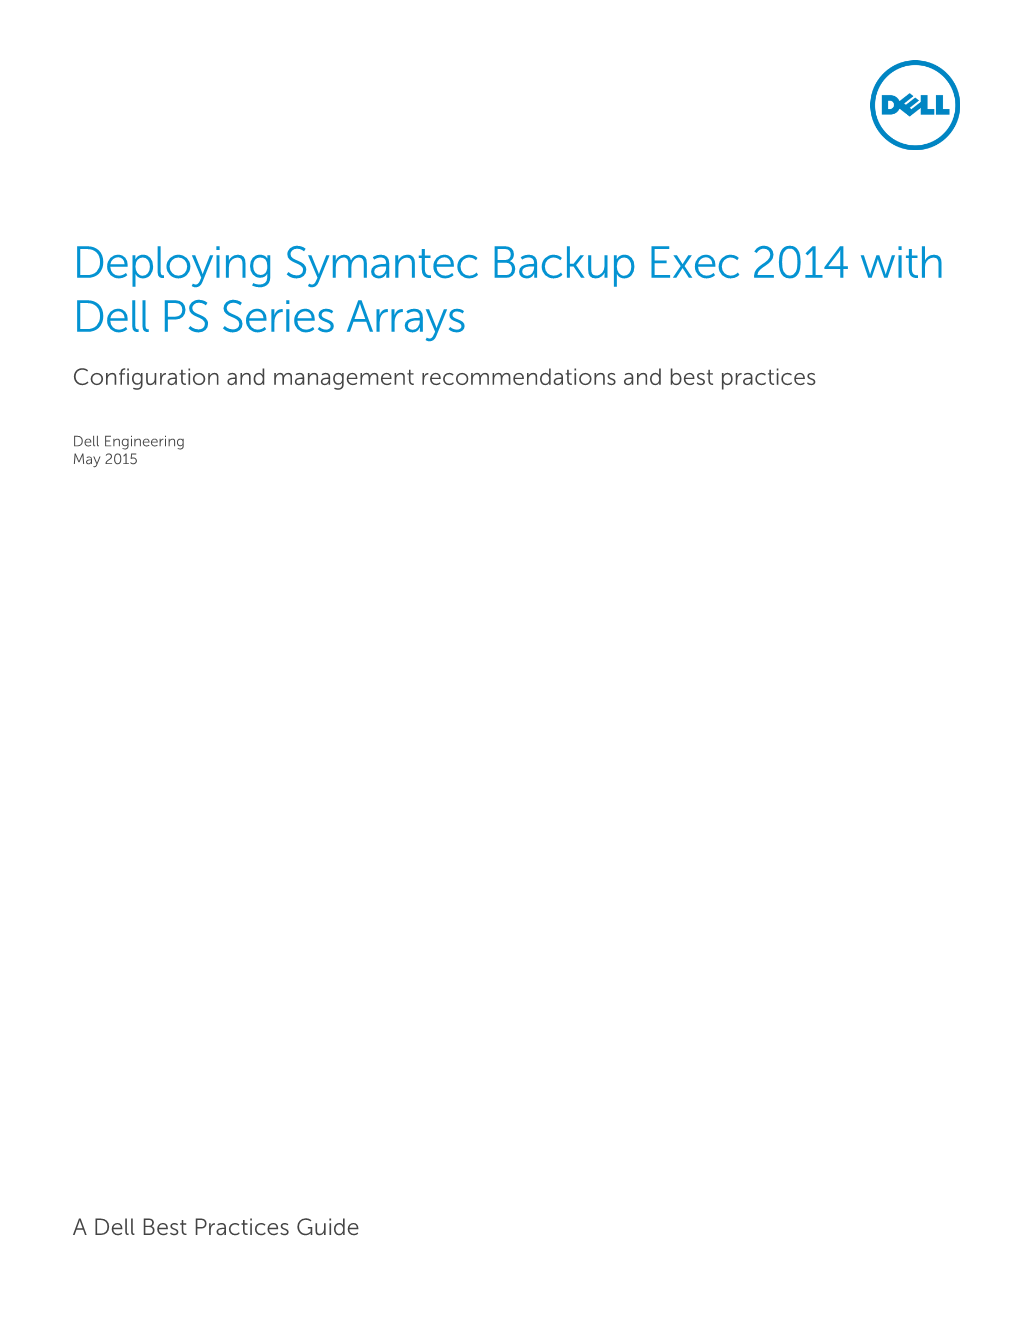 Deploying Symantec Backup Exec 2014 with Dell PS Series Arrays